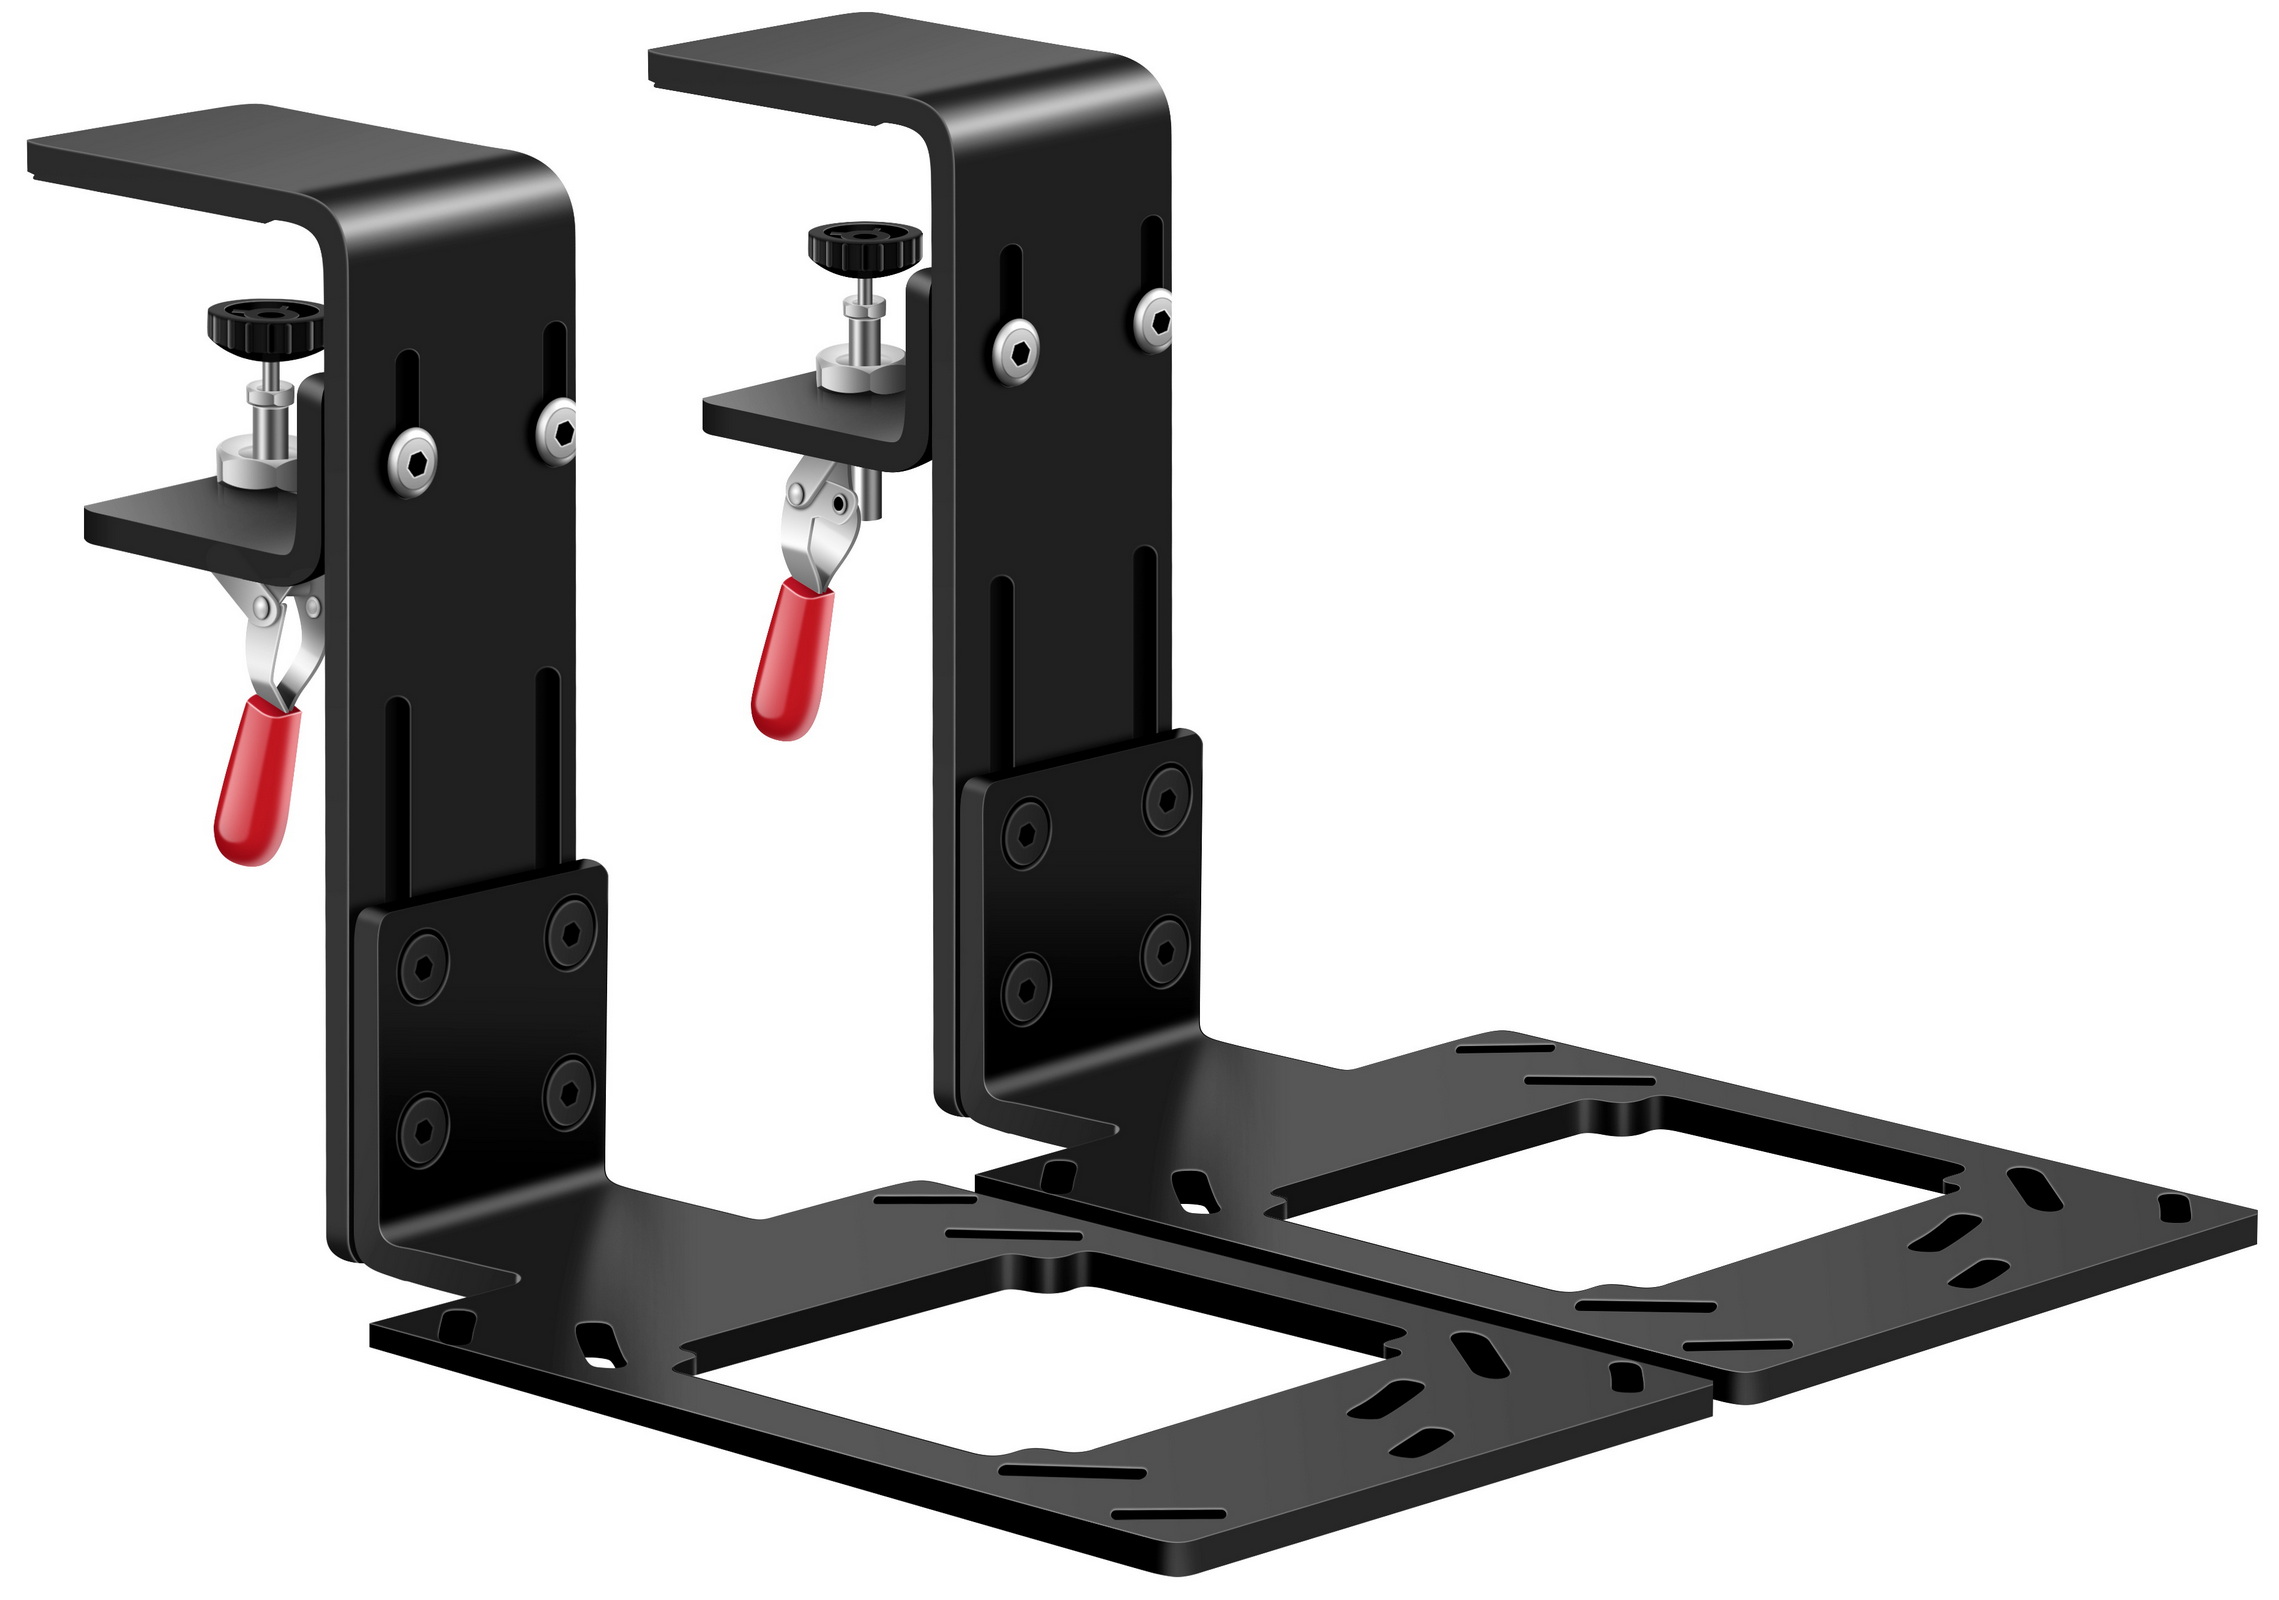 Set of 2 Desk Mounts Hotas Mount for Logitech G X52/X52 Pro/X56/X56 Rhino/Thrustmaster T.16000M with All Installation Bolts & Install Manual